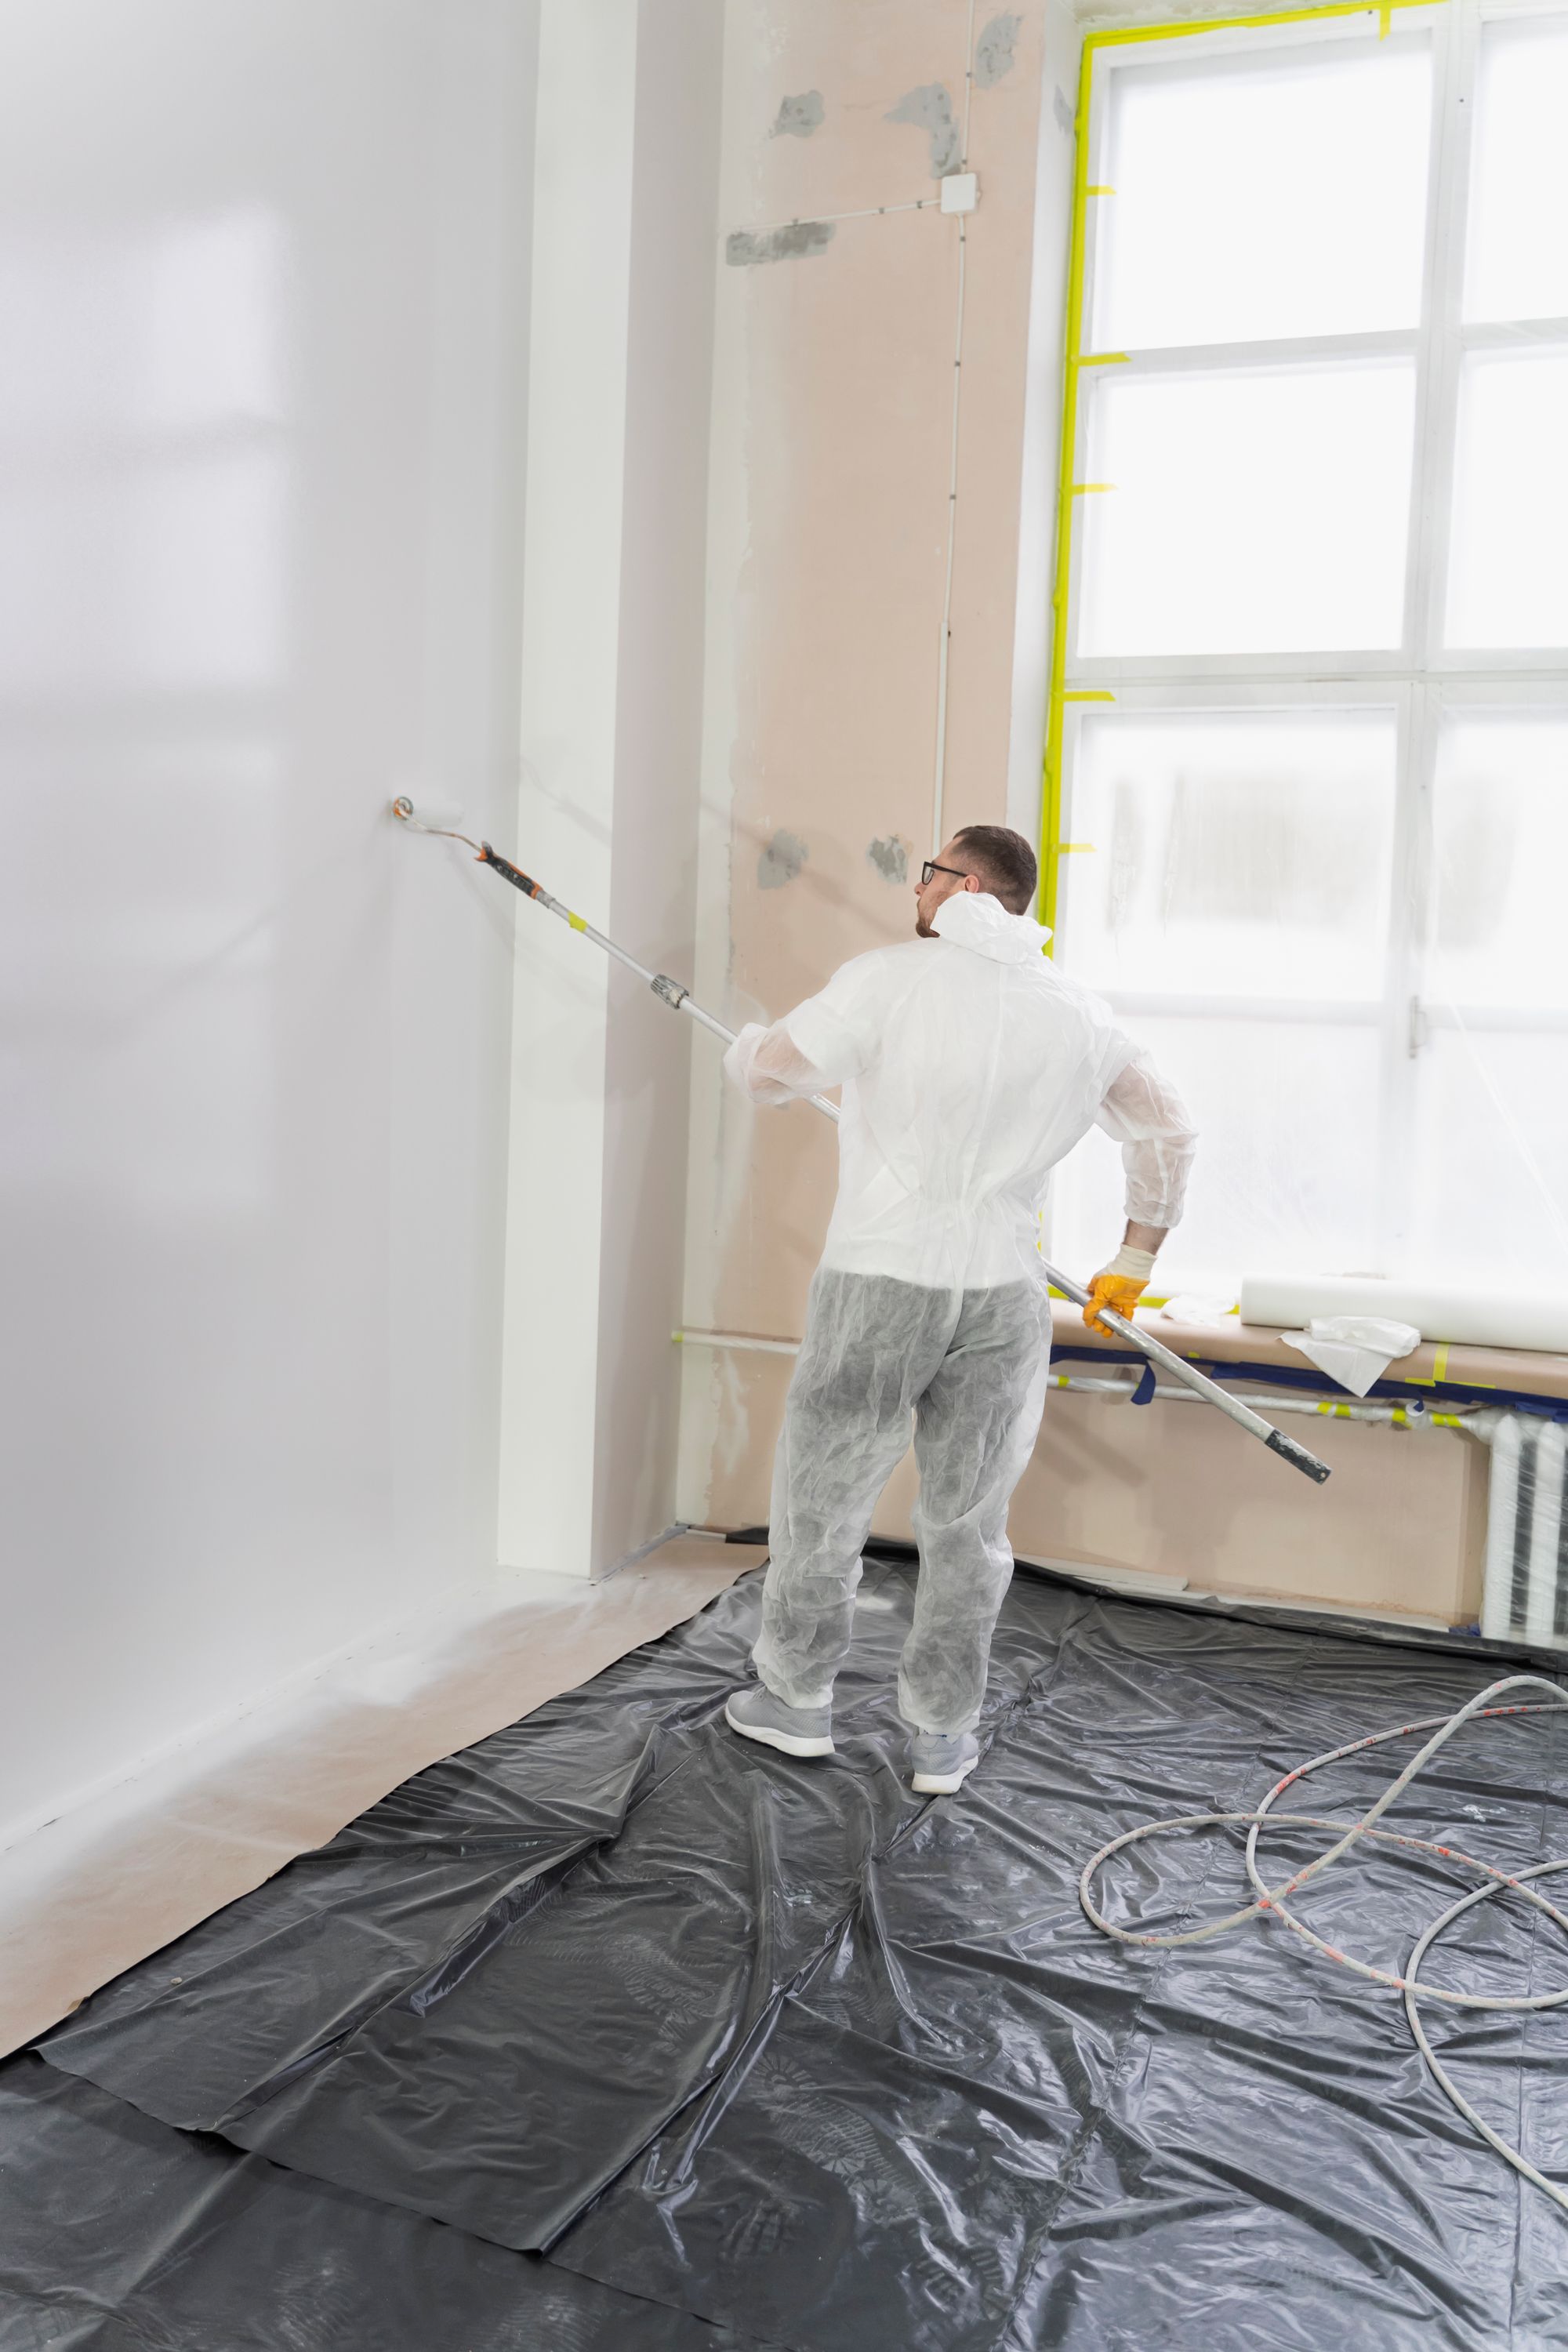 Factors You Need to Consider When Hiring Home Painting Contractors